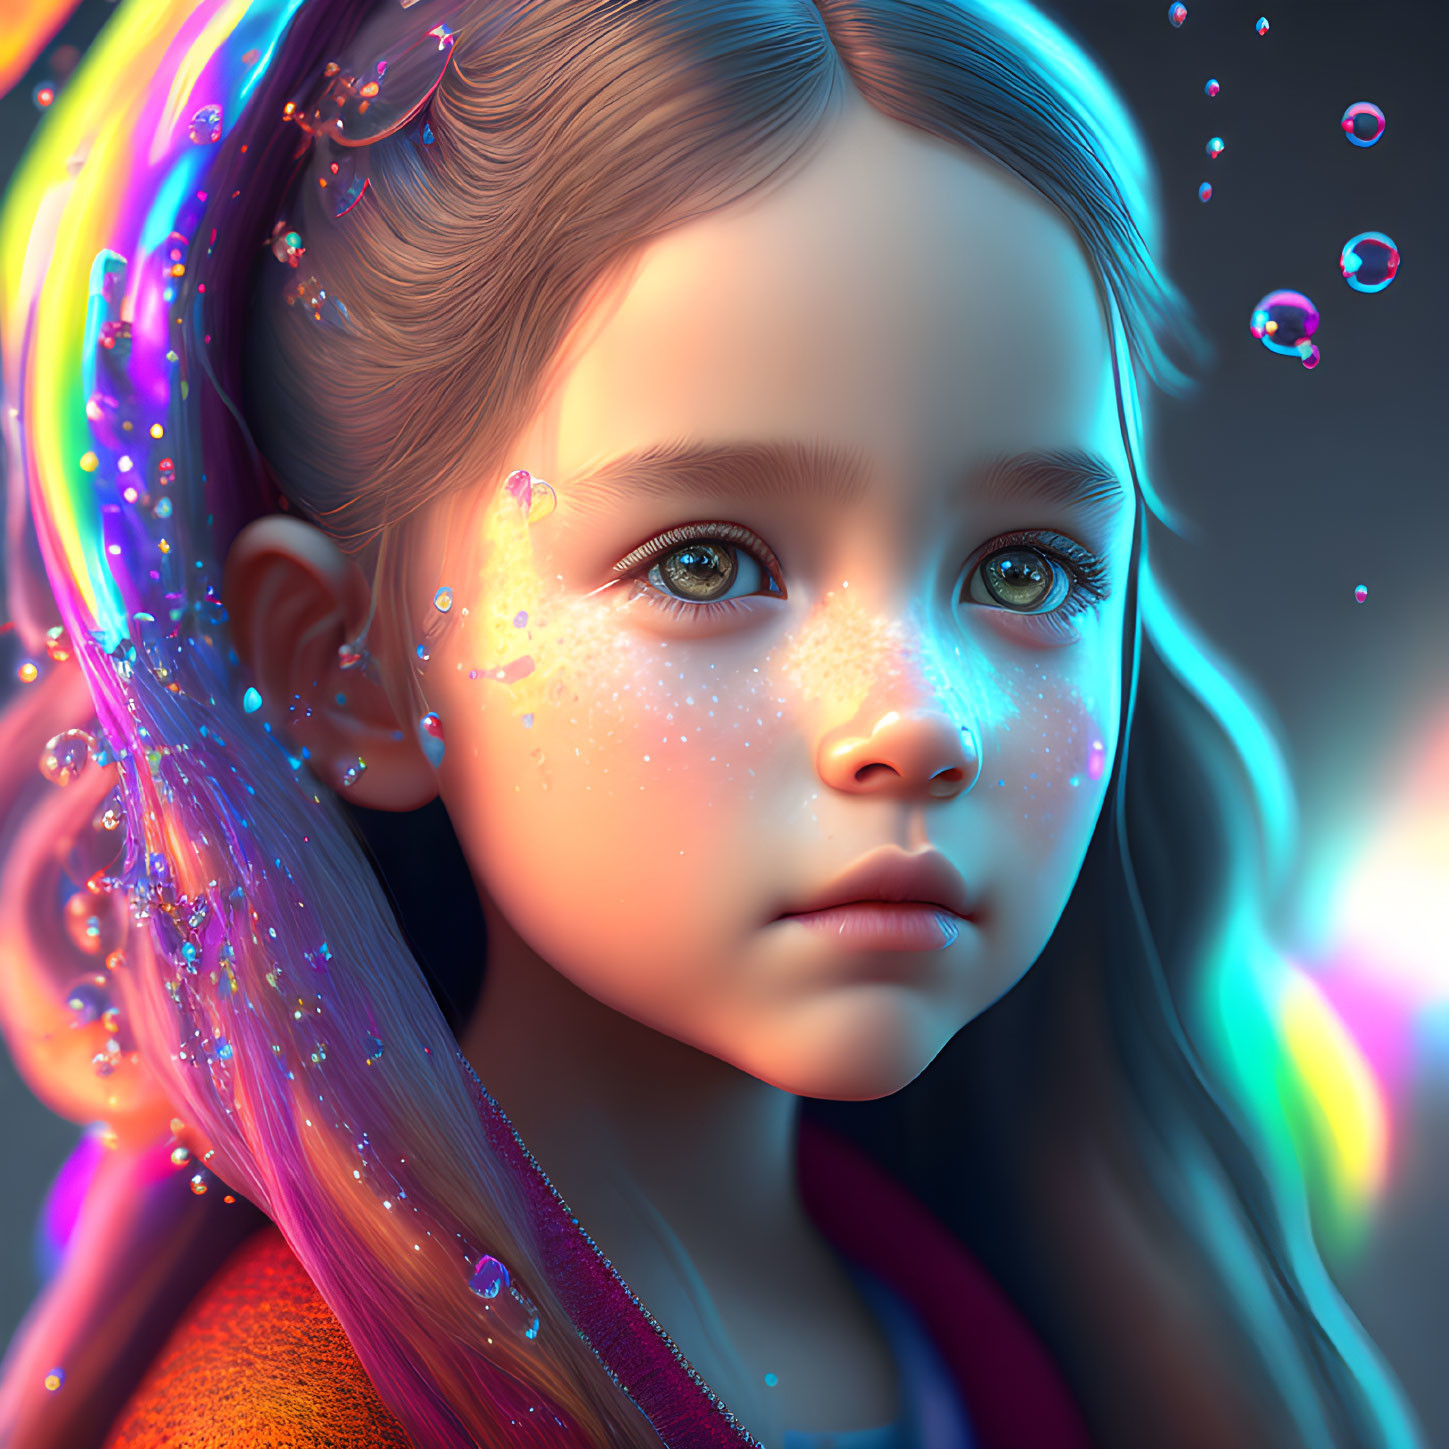 Colorful Digital Art Portrait of Girl with Sparkling Hair and Blue Eyes